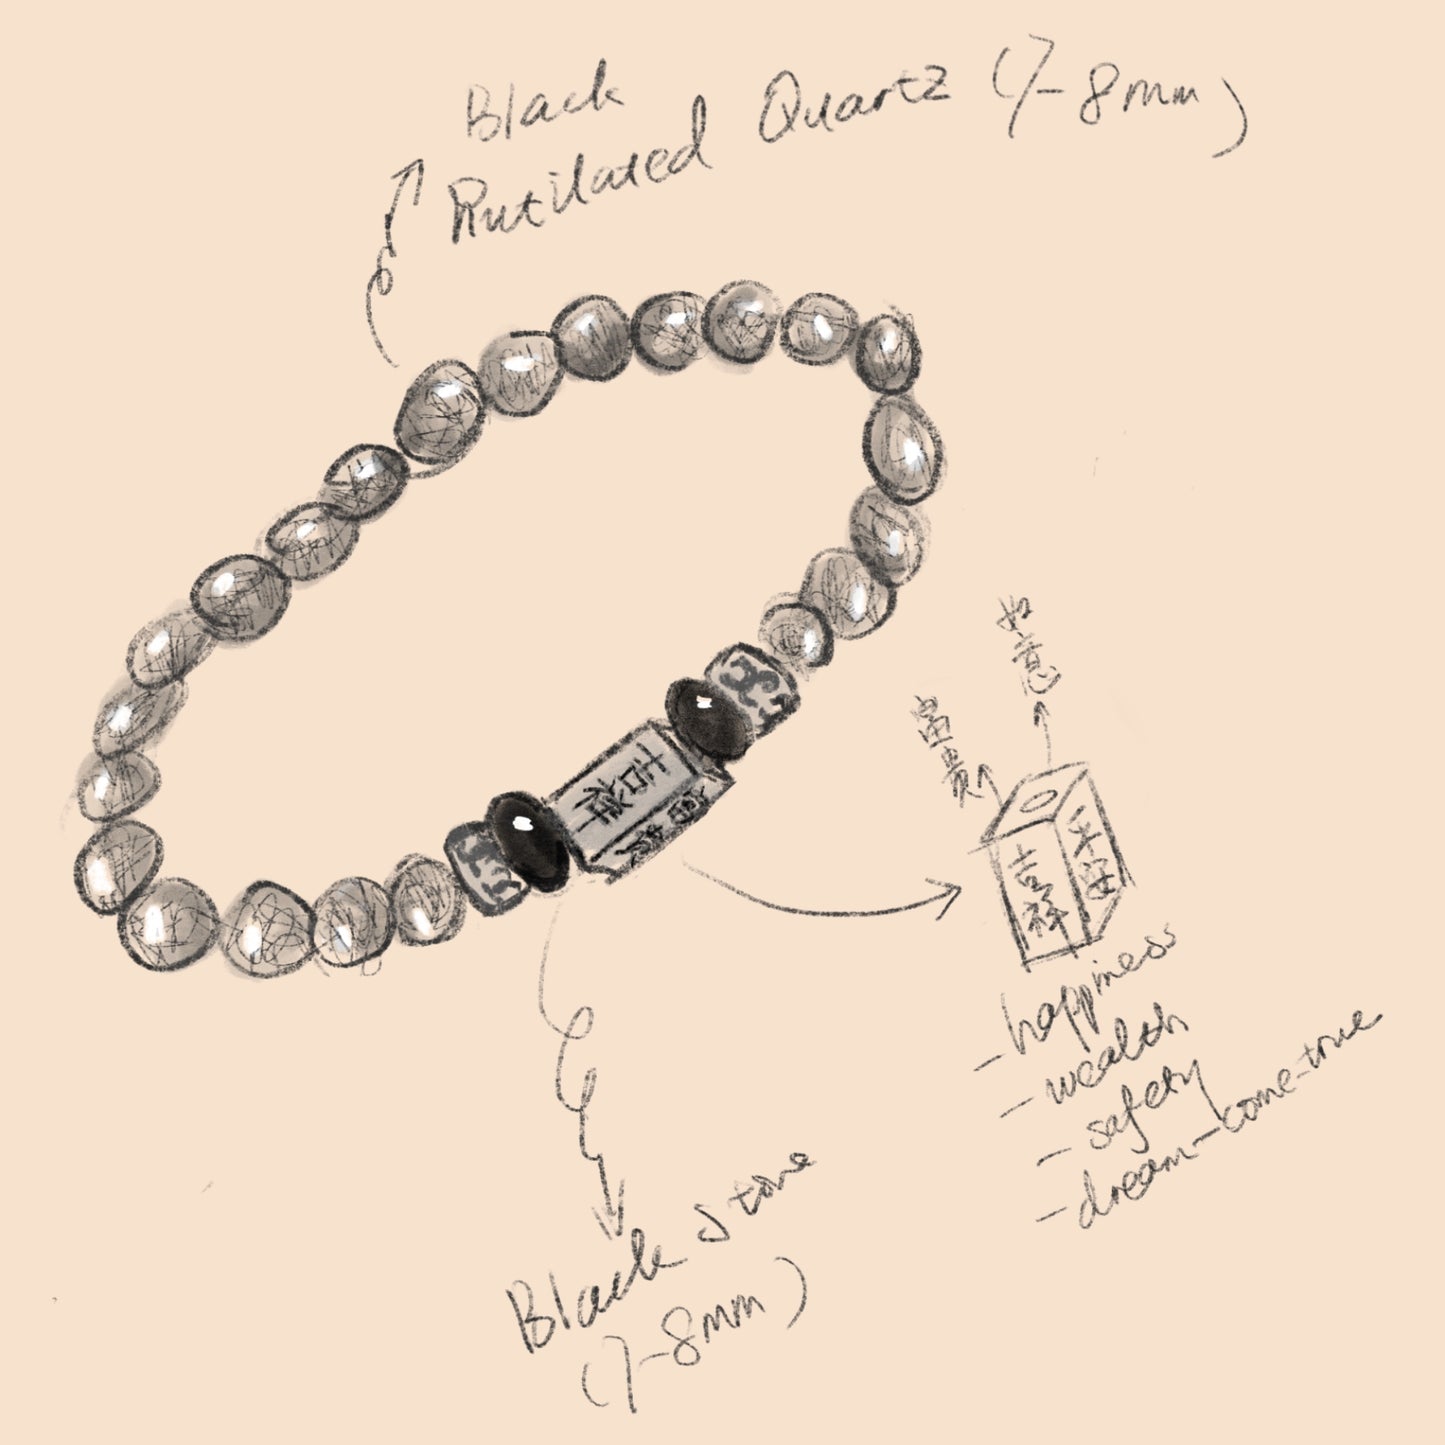 Fortune Vanguard - Natural Black Crystal with Silver Chinese Character Charm (Unisex)